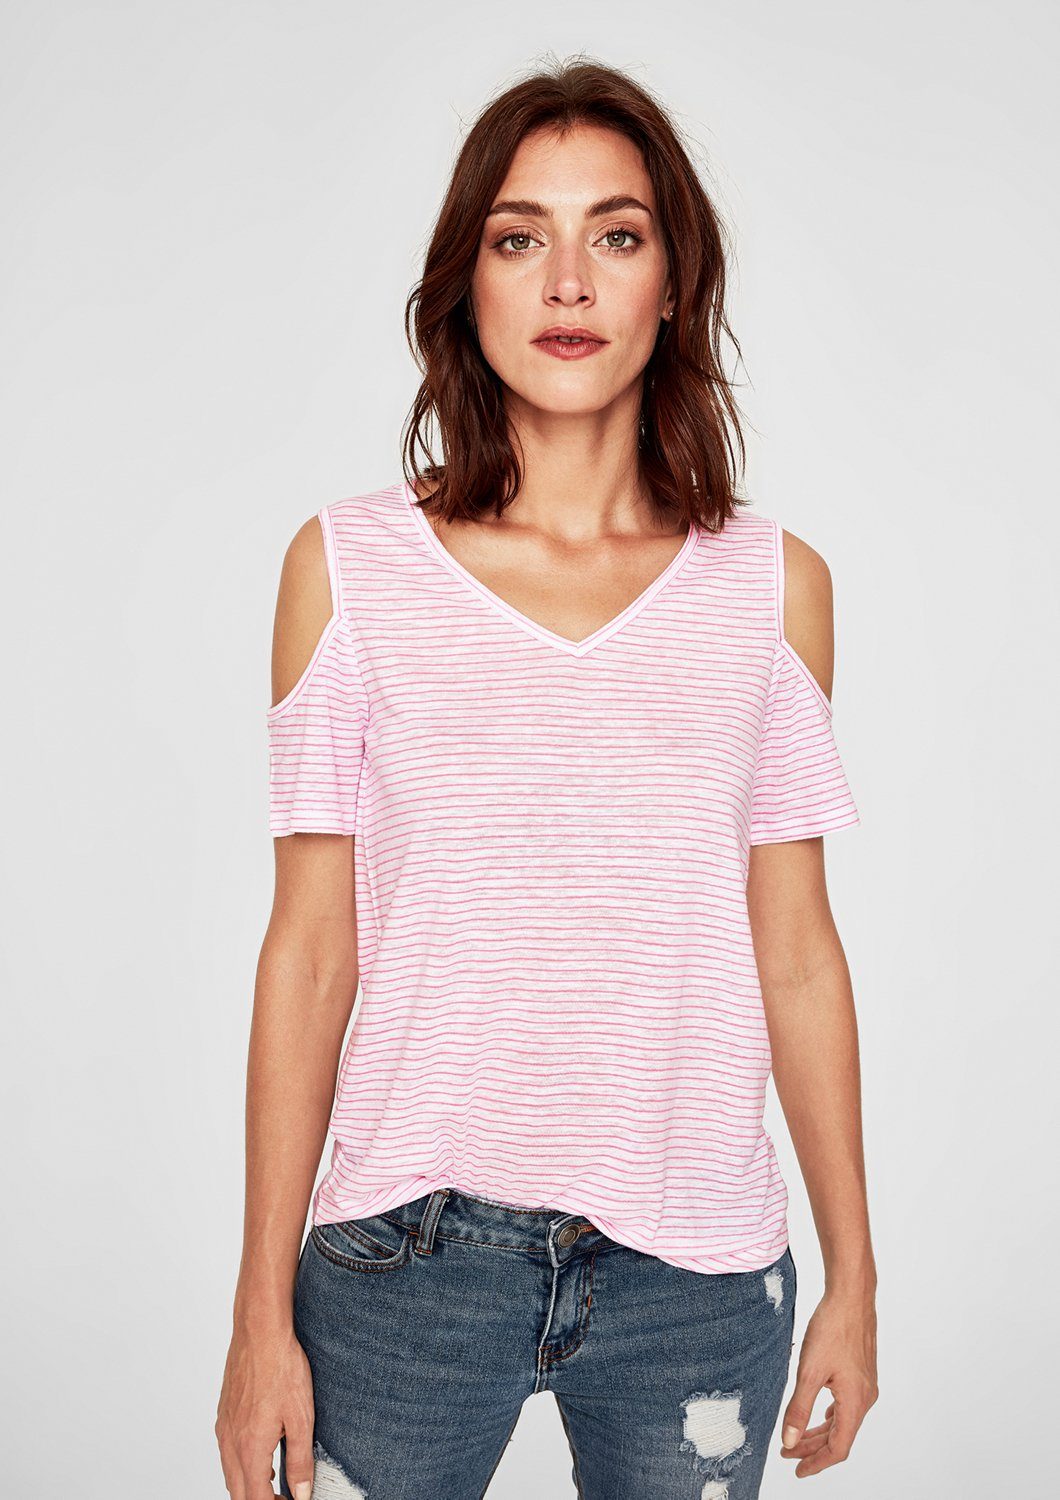 Otto - s.Oliver RED LABEL NU 15% KORTING: s.Oliver RED LABEL Gestreepte blouse met cut-outs